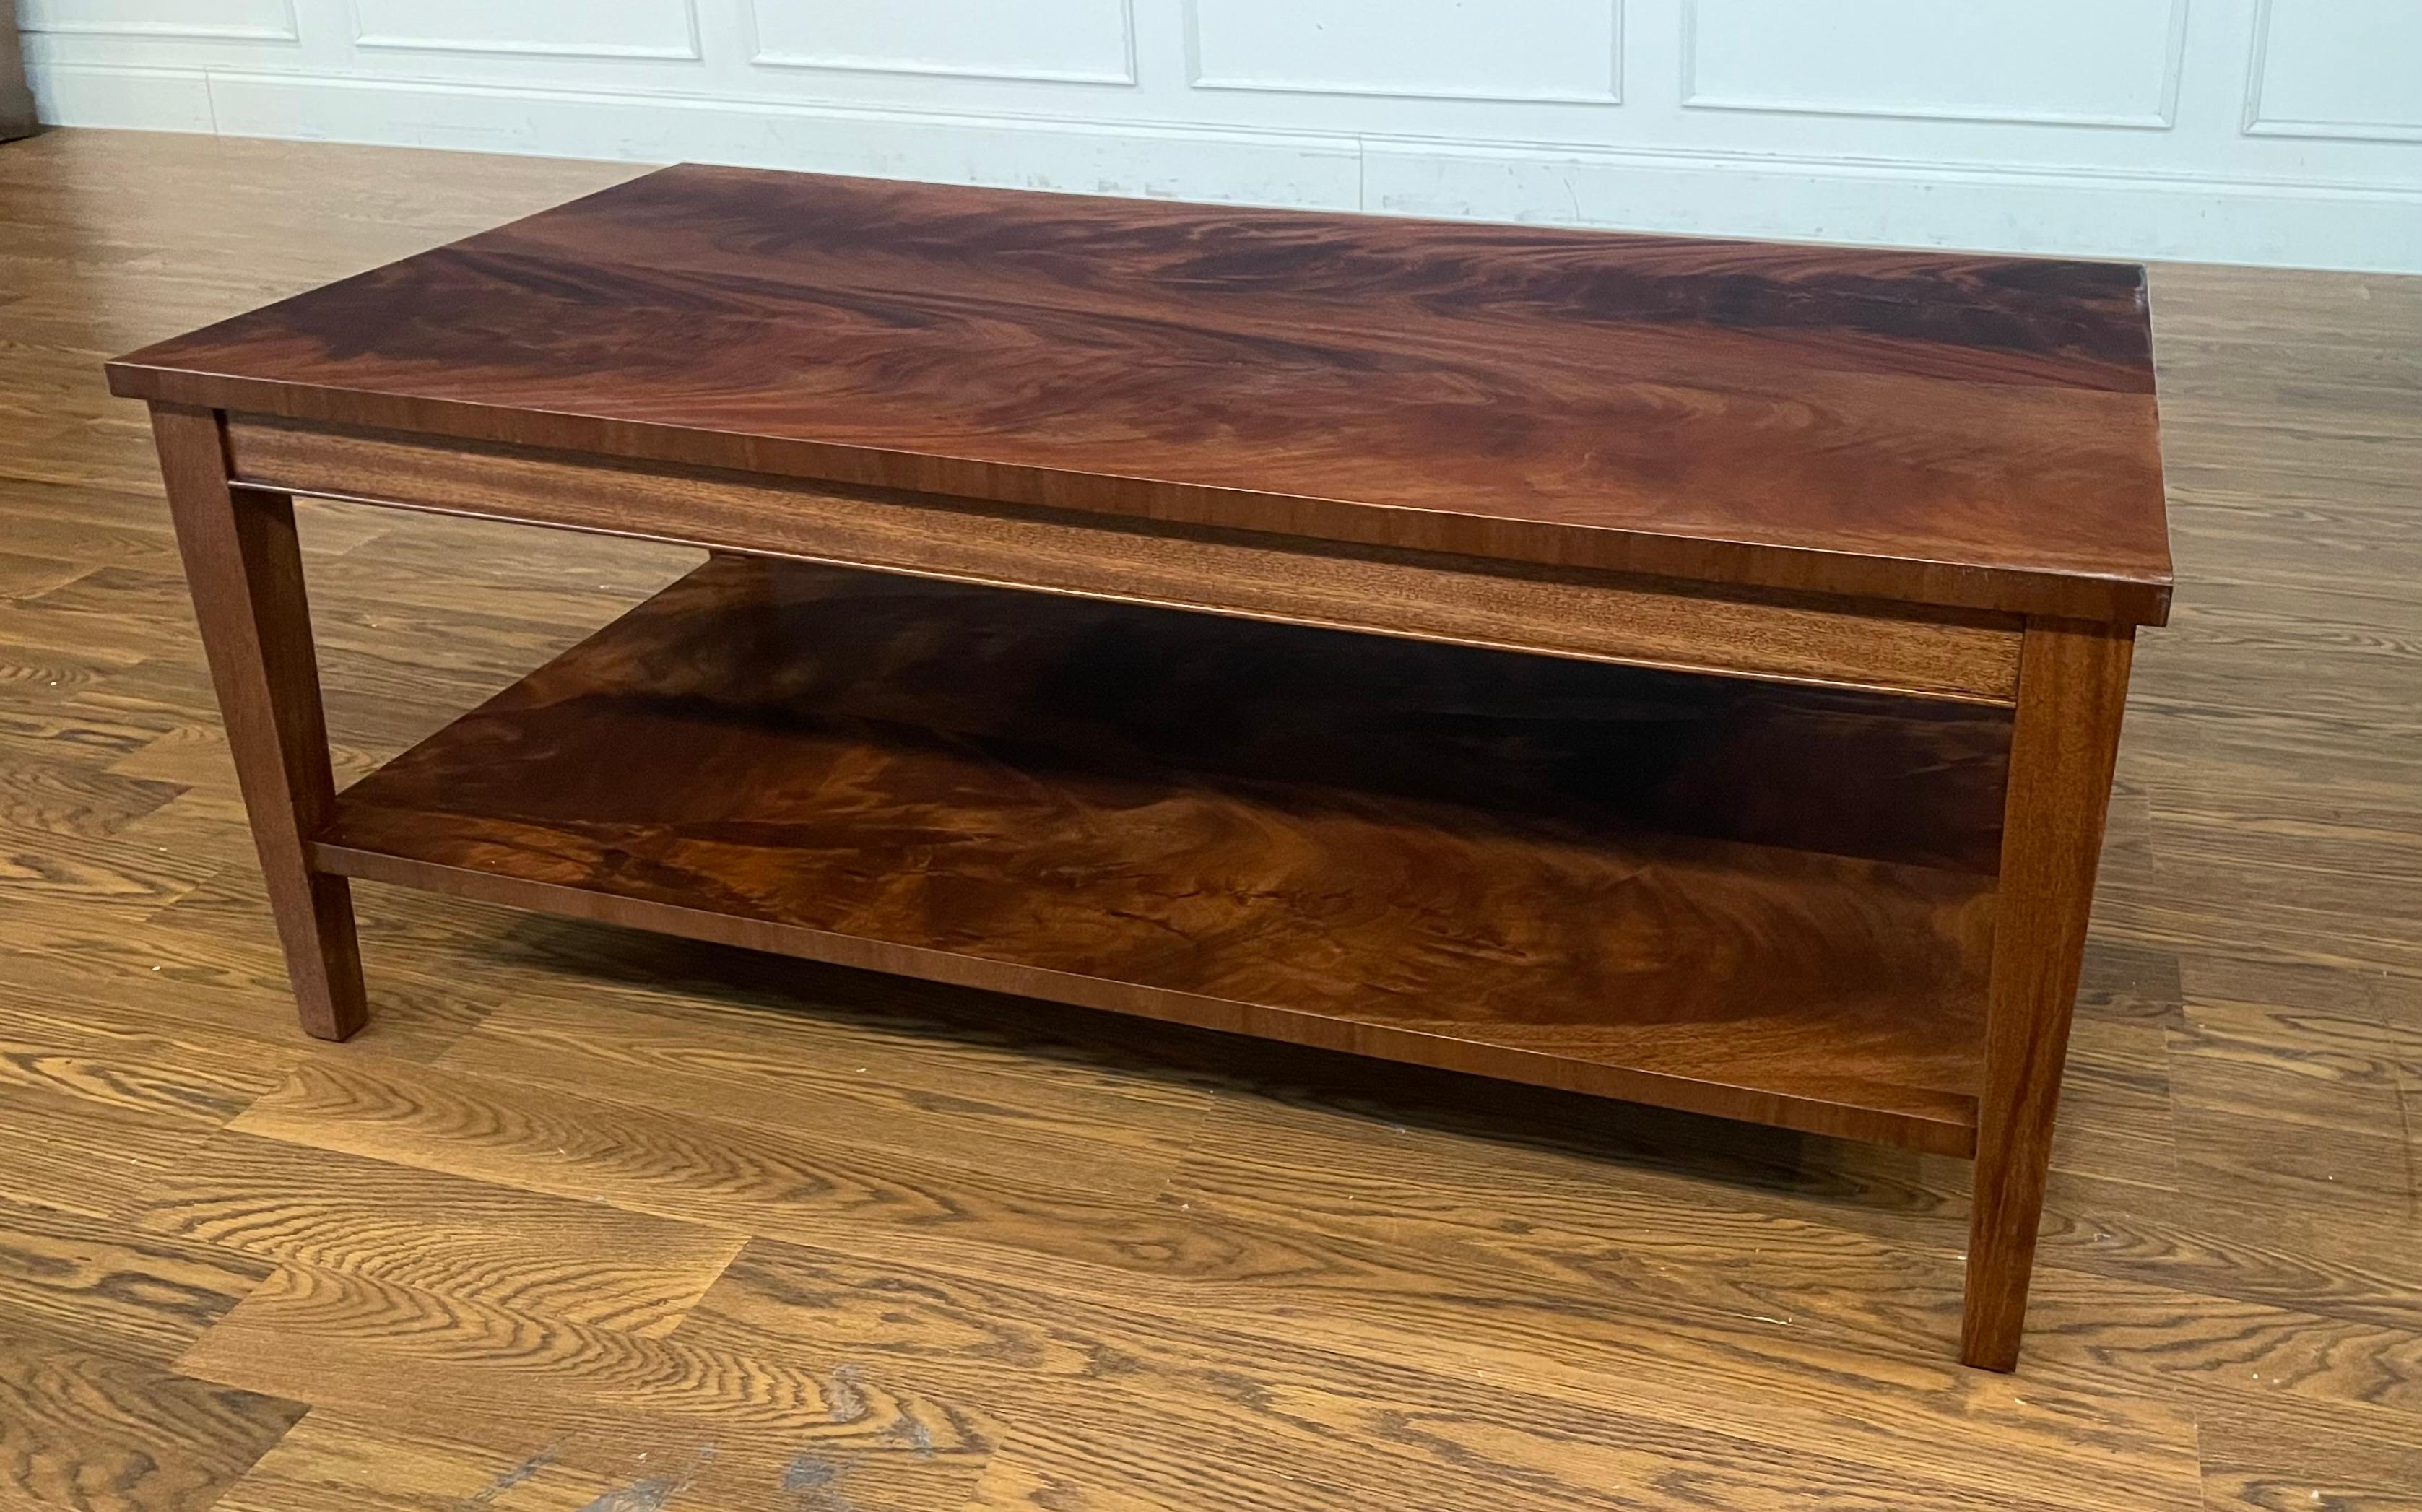 This is a rectangular mahogany cocktail table made-to-order in the Leighton Hall shop in Suwanee, Georgia.  It features a top and lower shelf of reverse-slip-matched swirly crotch mahogany, square tapered legs, and a medium brown mahogany color with